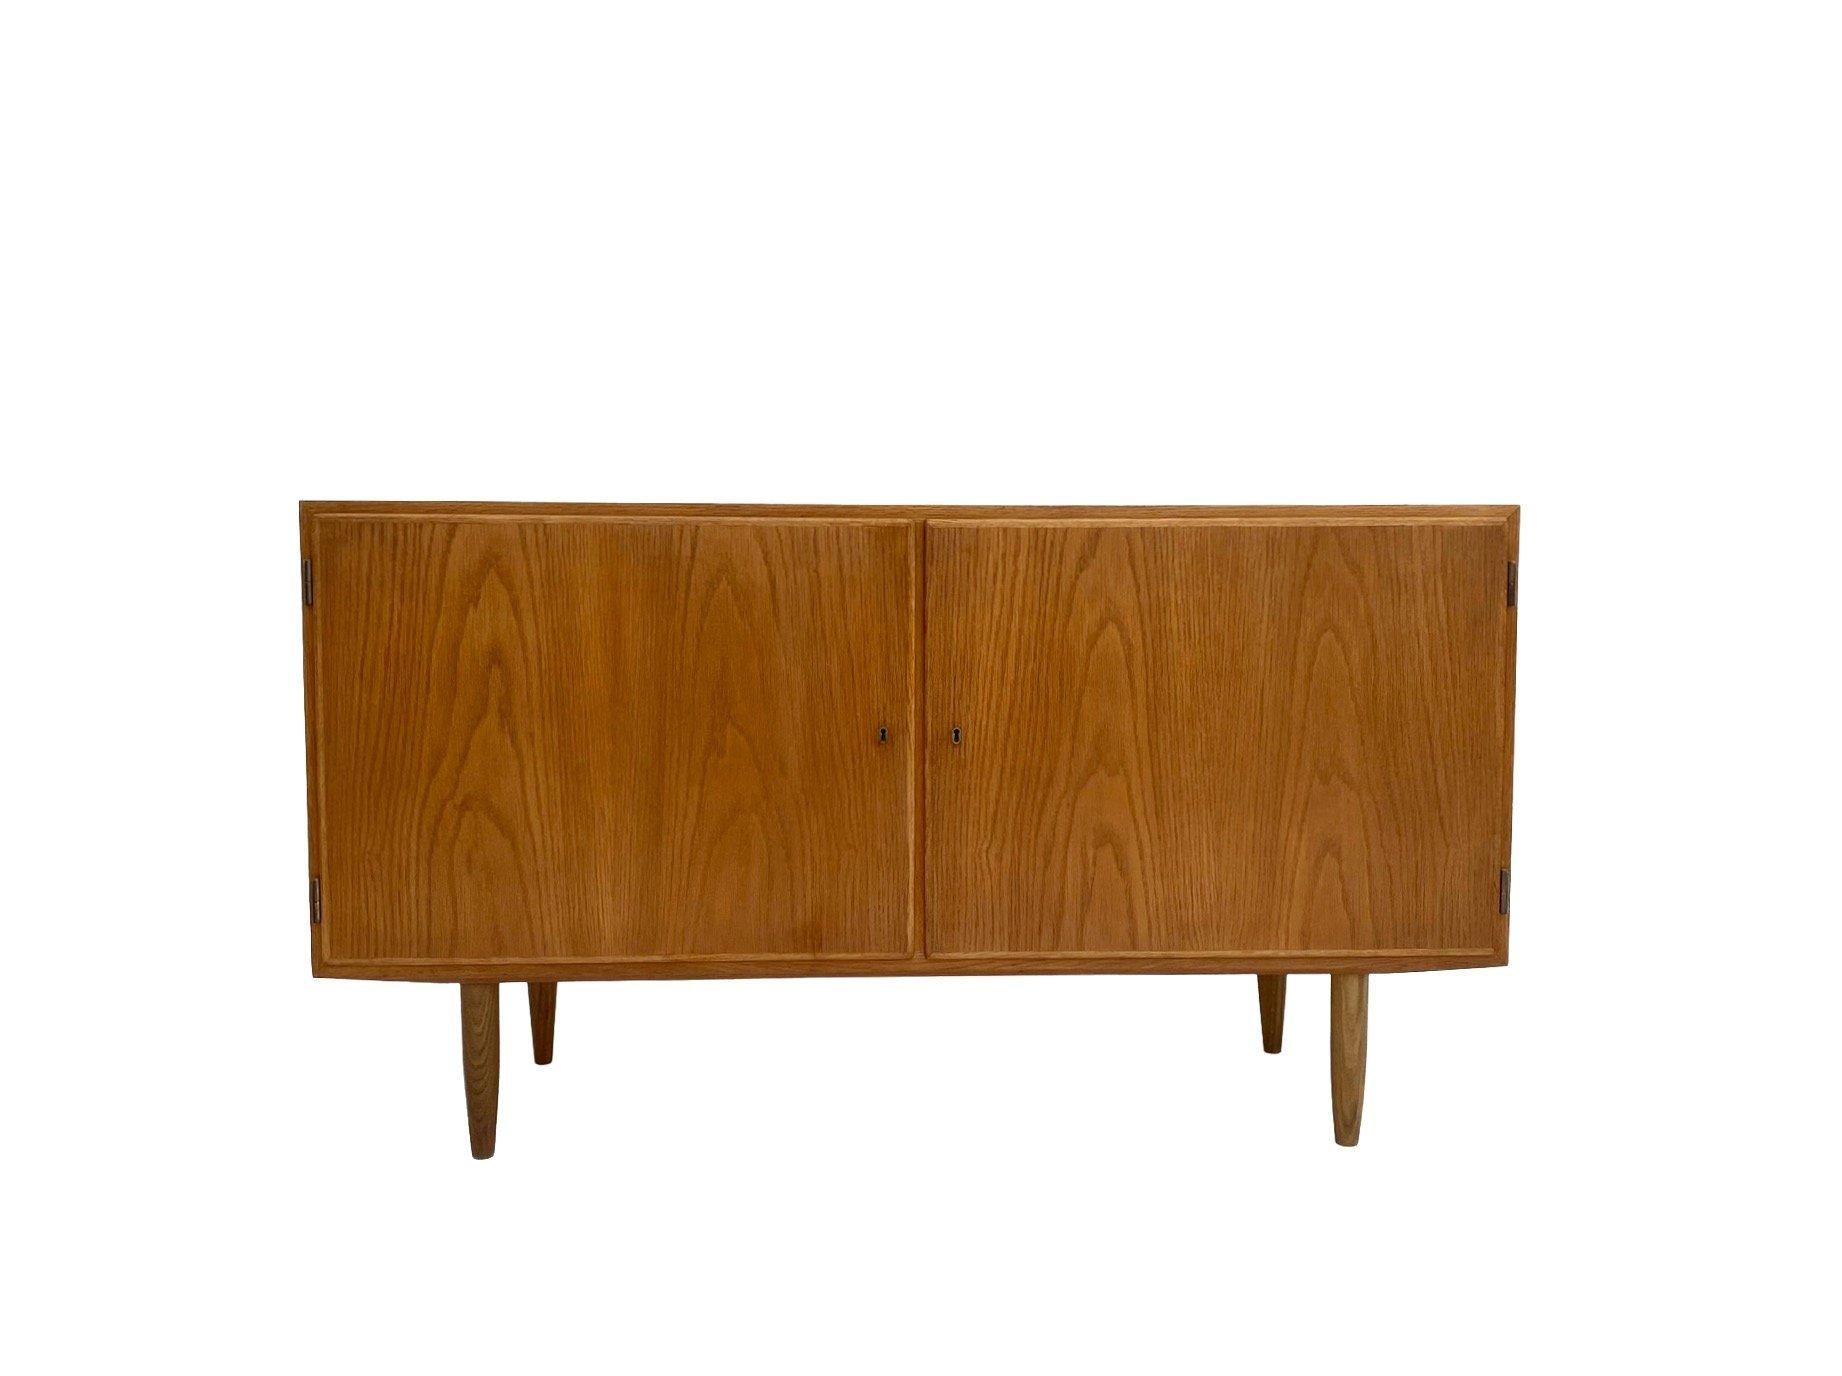 A beautiful Danish oak sideboard designed by Carlo Jensen for Poul Hundevad, this would make a stylish addition to any living or work area.

The cabinet has a cupboard to both ends one with two adjustable shelves and the other with three removable